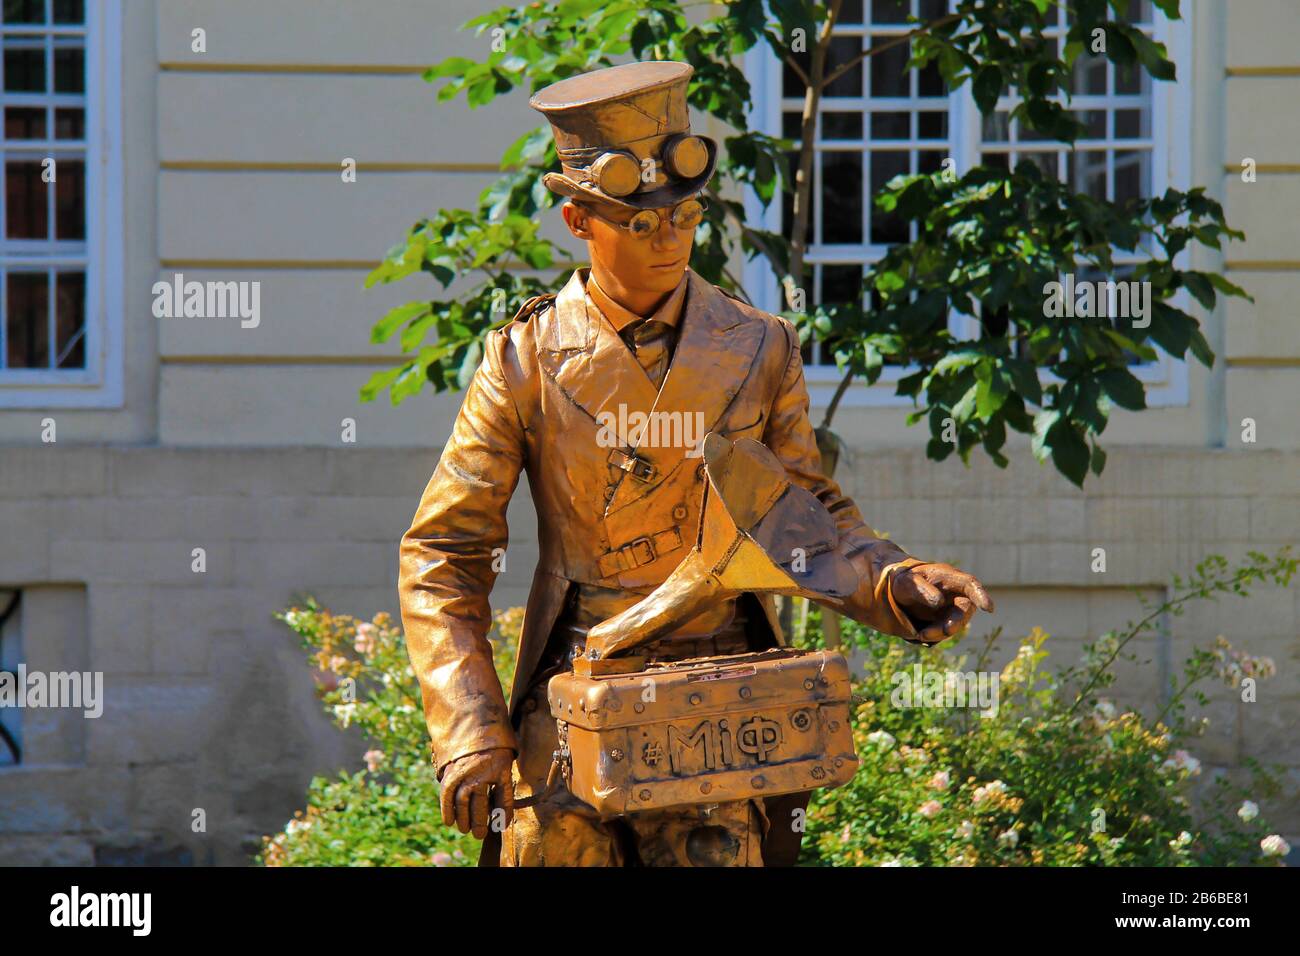 On the square in the Ukrainian city of Lviv there is a living statue in the form of an old organ-grinder in a yellow suit. Lvov Ukraine Stock Photo